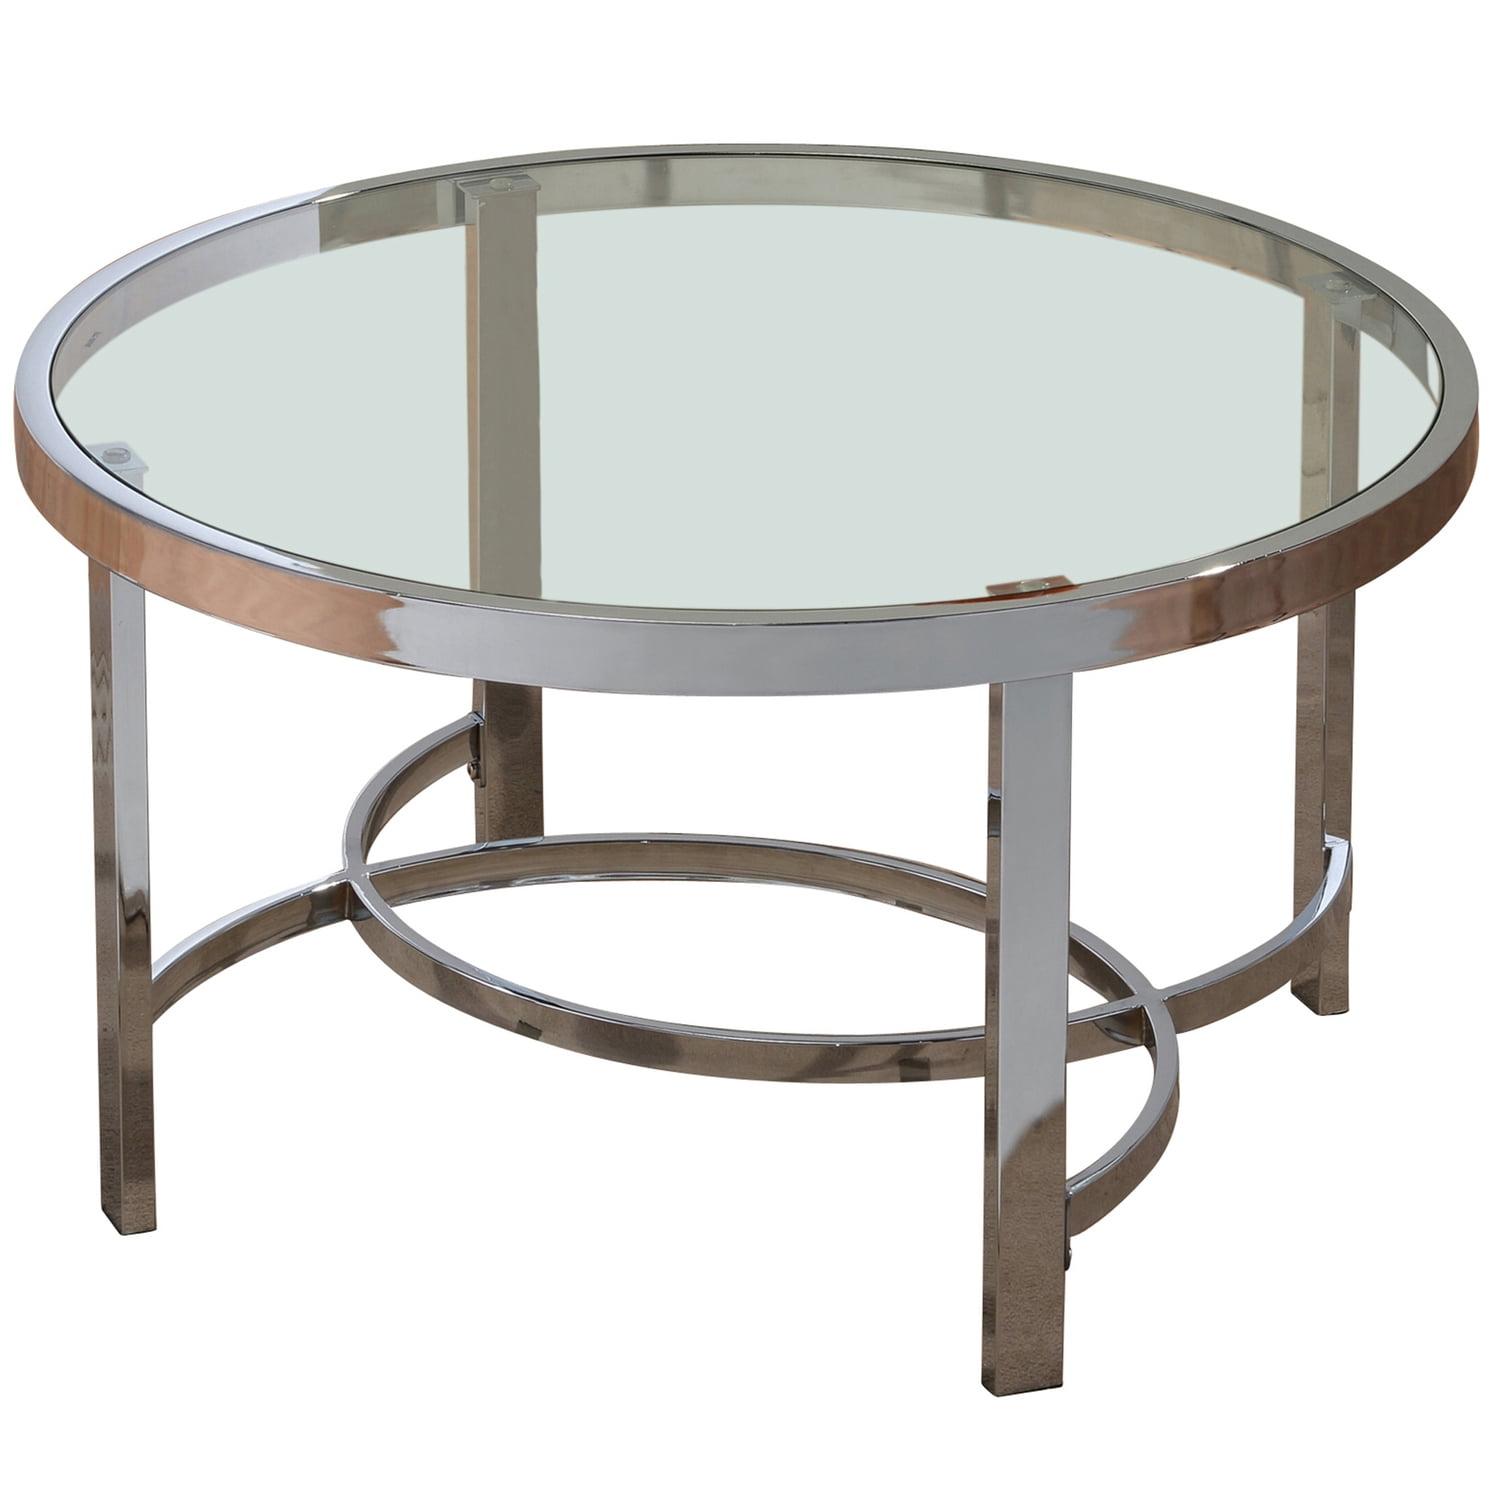 Contemporary Overlapping Chrome & Glass Round Coffee Table